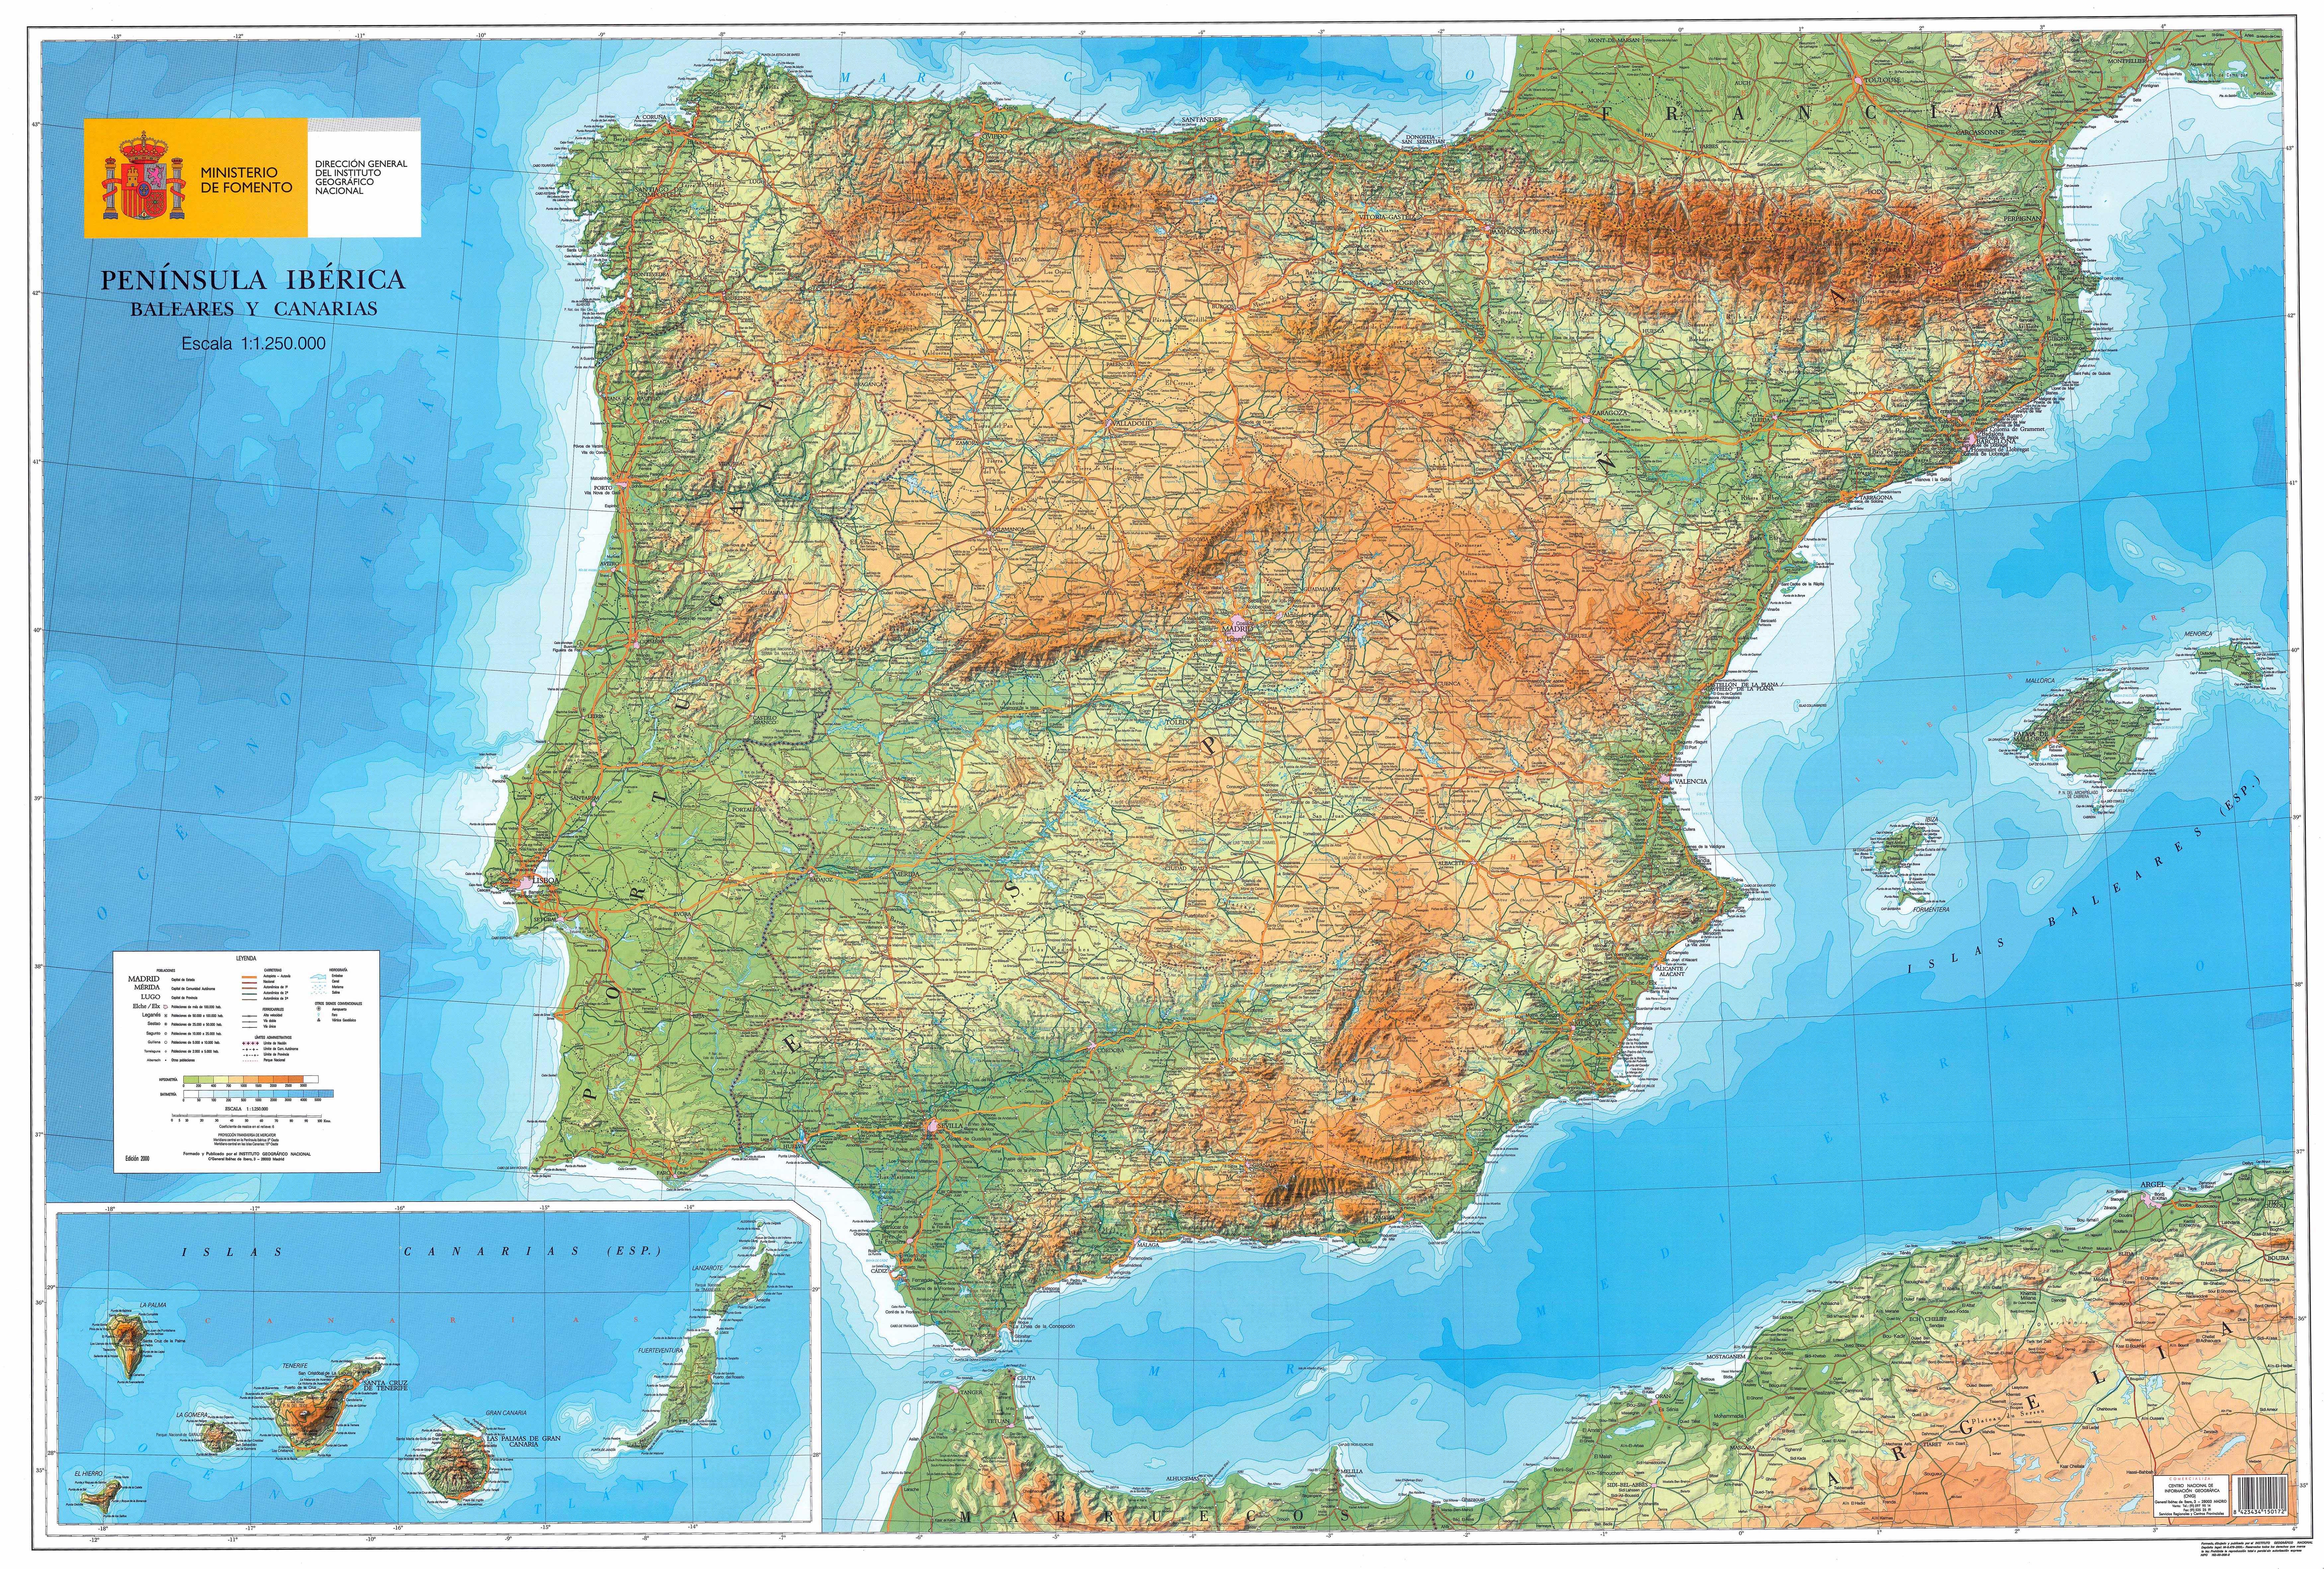 Detailed Geographical Map of Spain